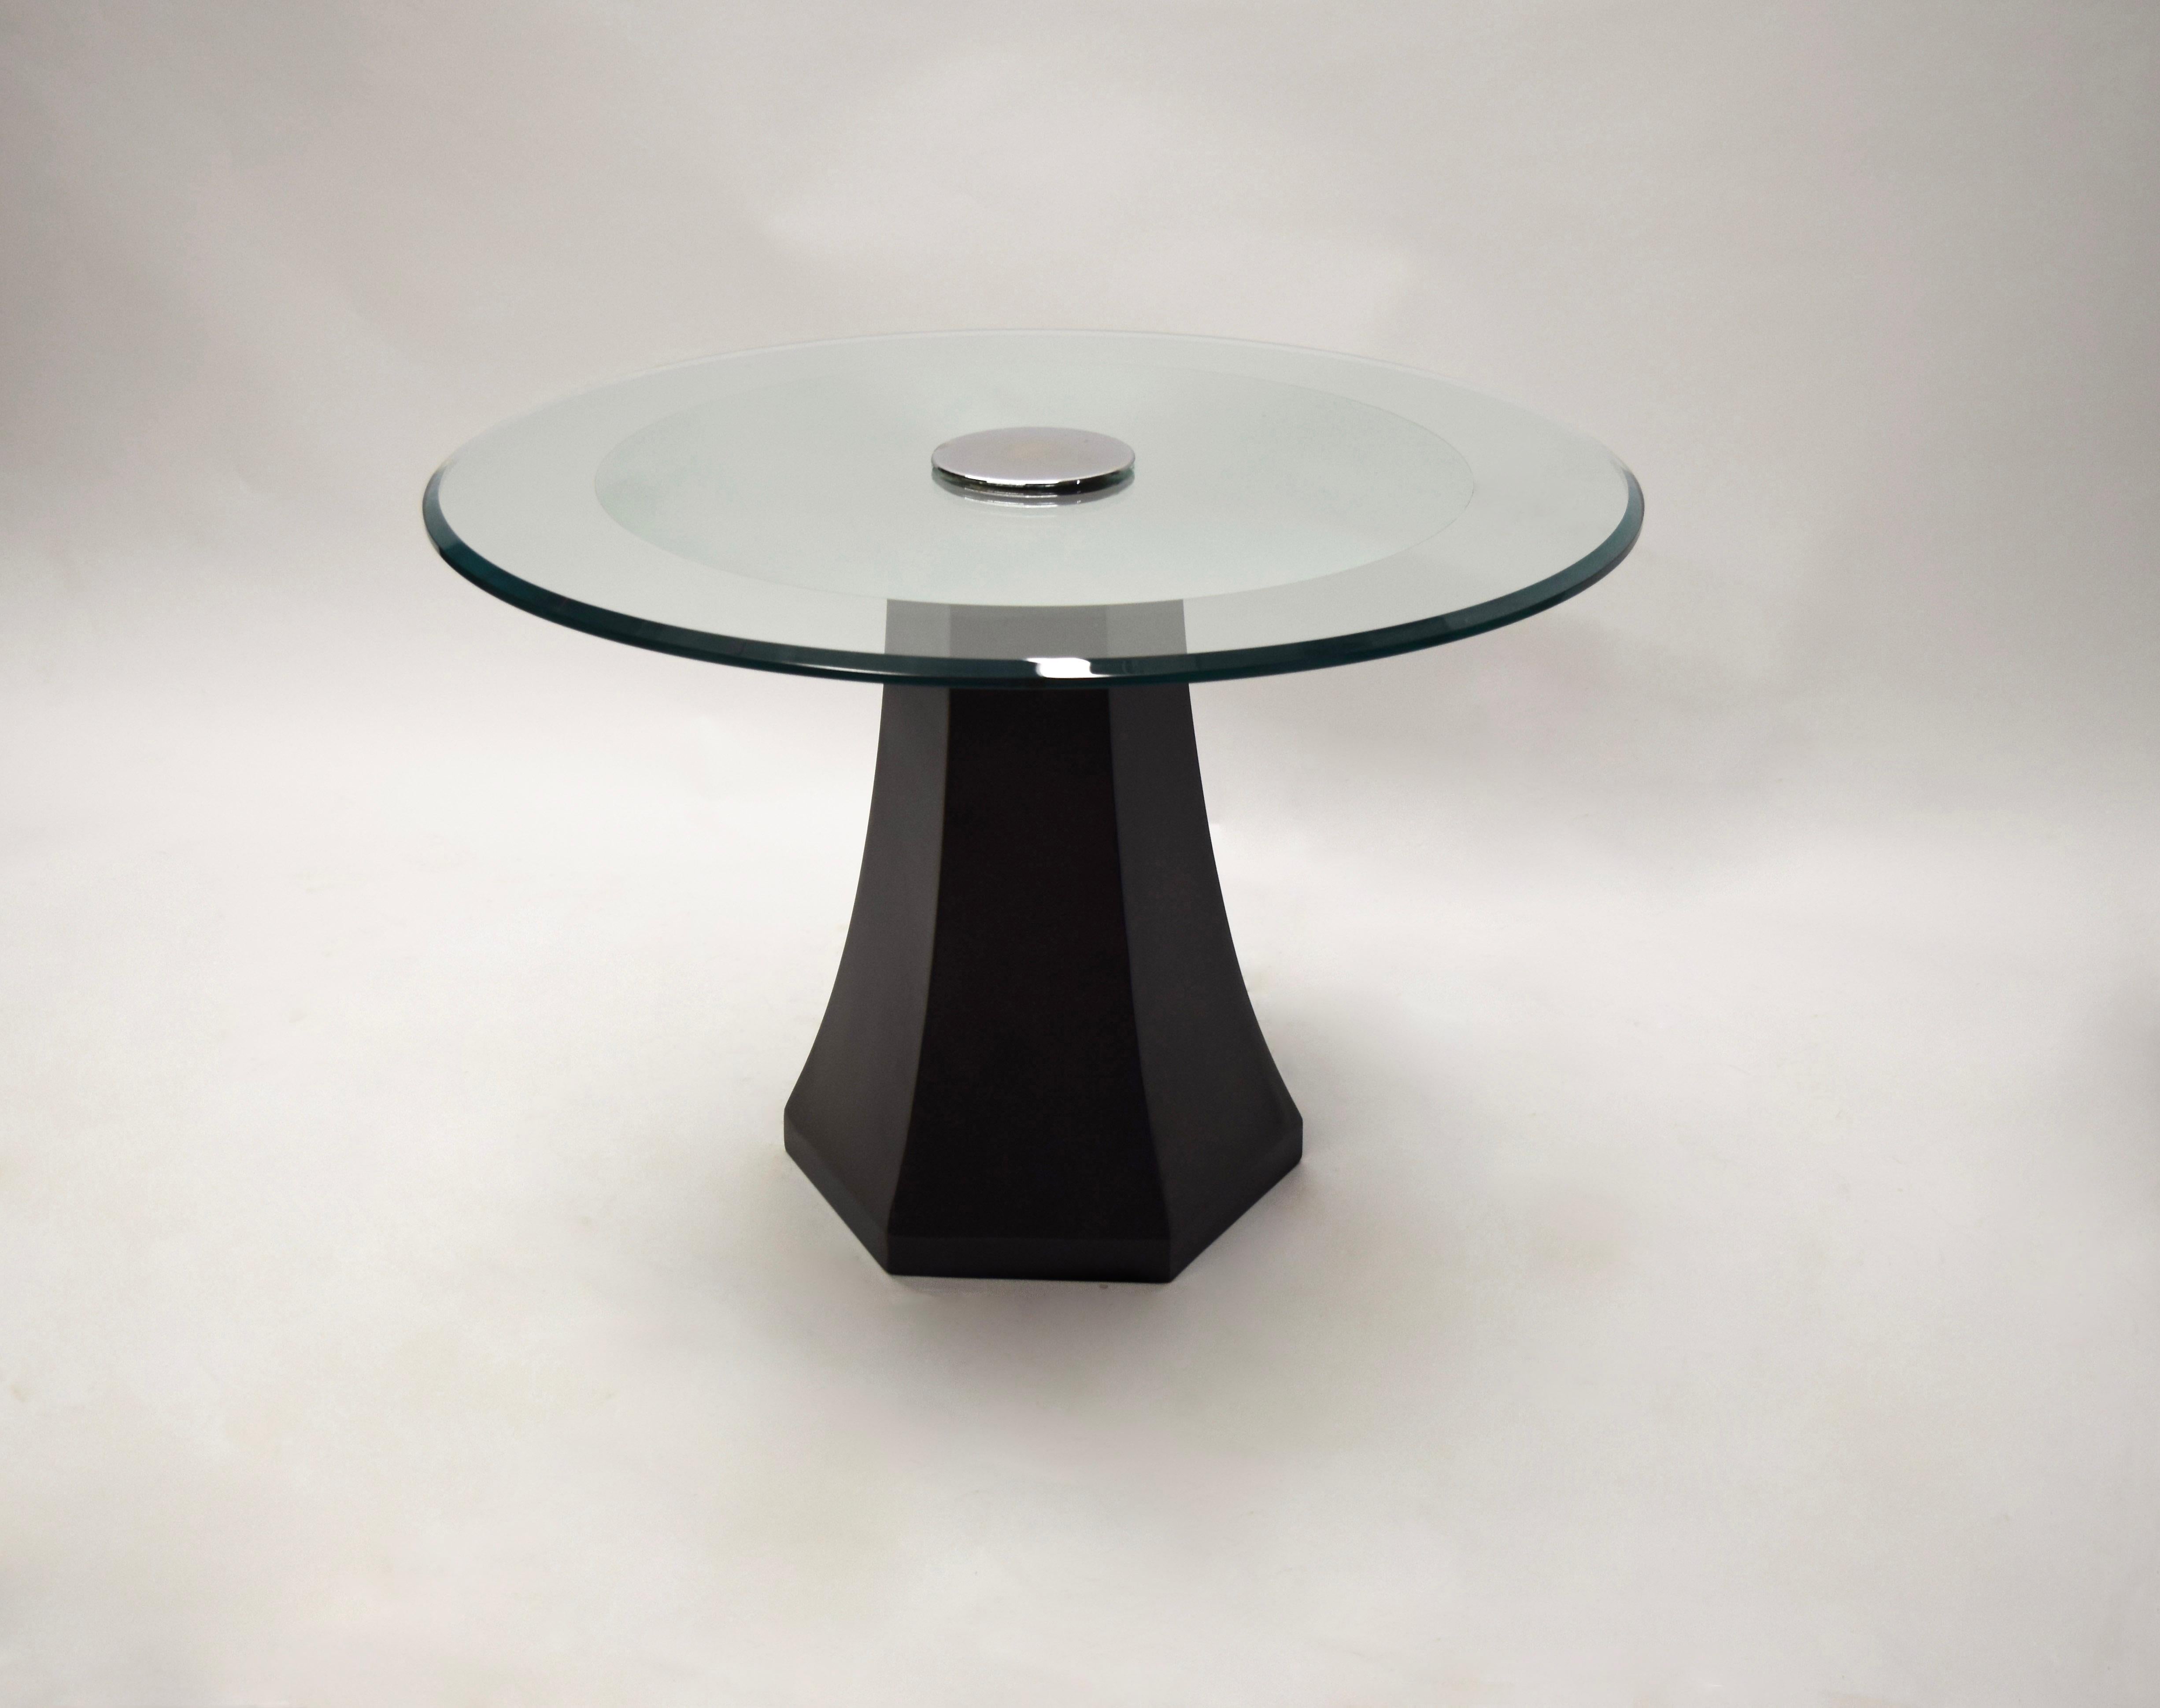 Side table with a satin black lacquered wood, hexagonal base that supports a round, beveled glass top that has a center mirrored accent; the base and top secured together by a round polished chrome-plated brass hardware piece.